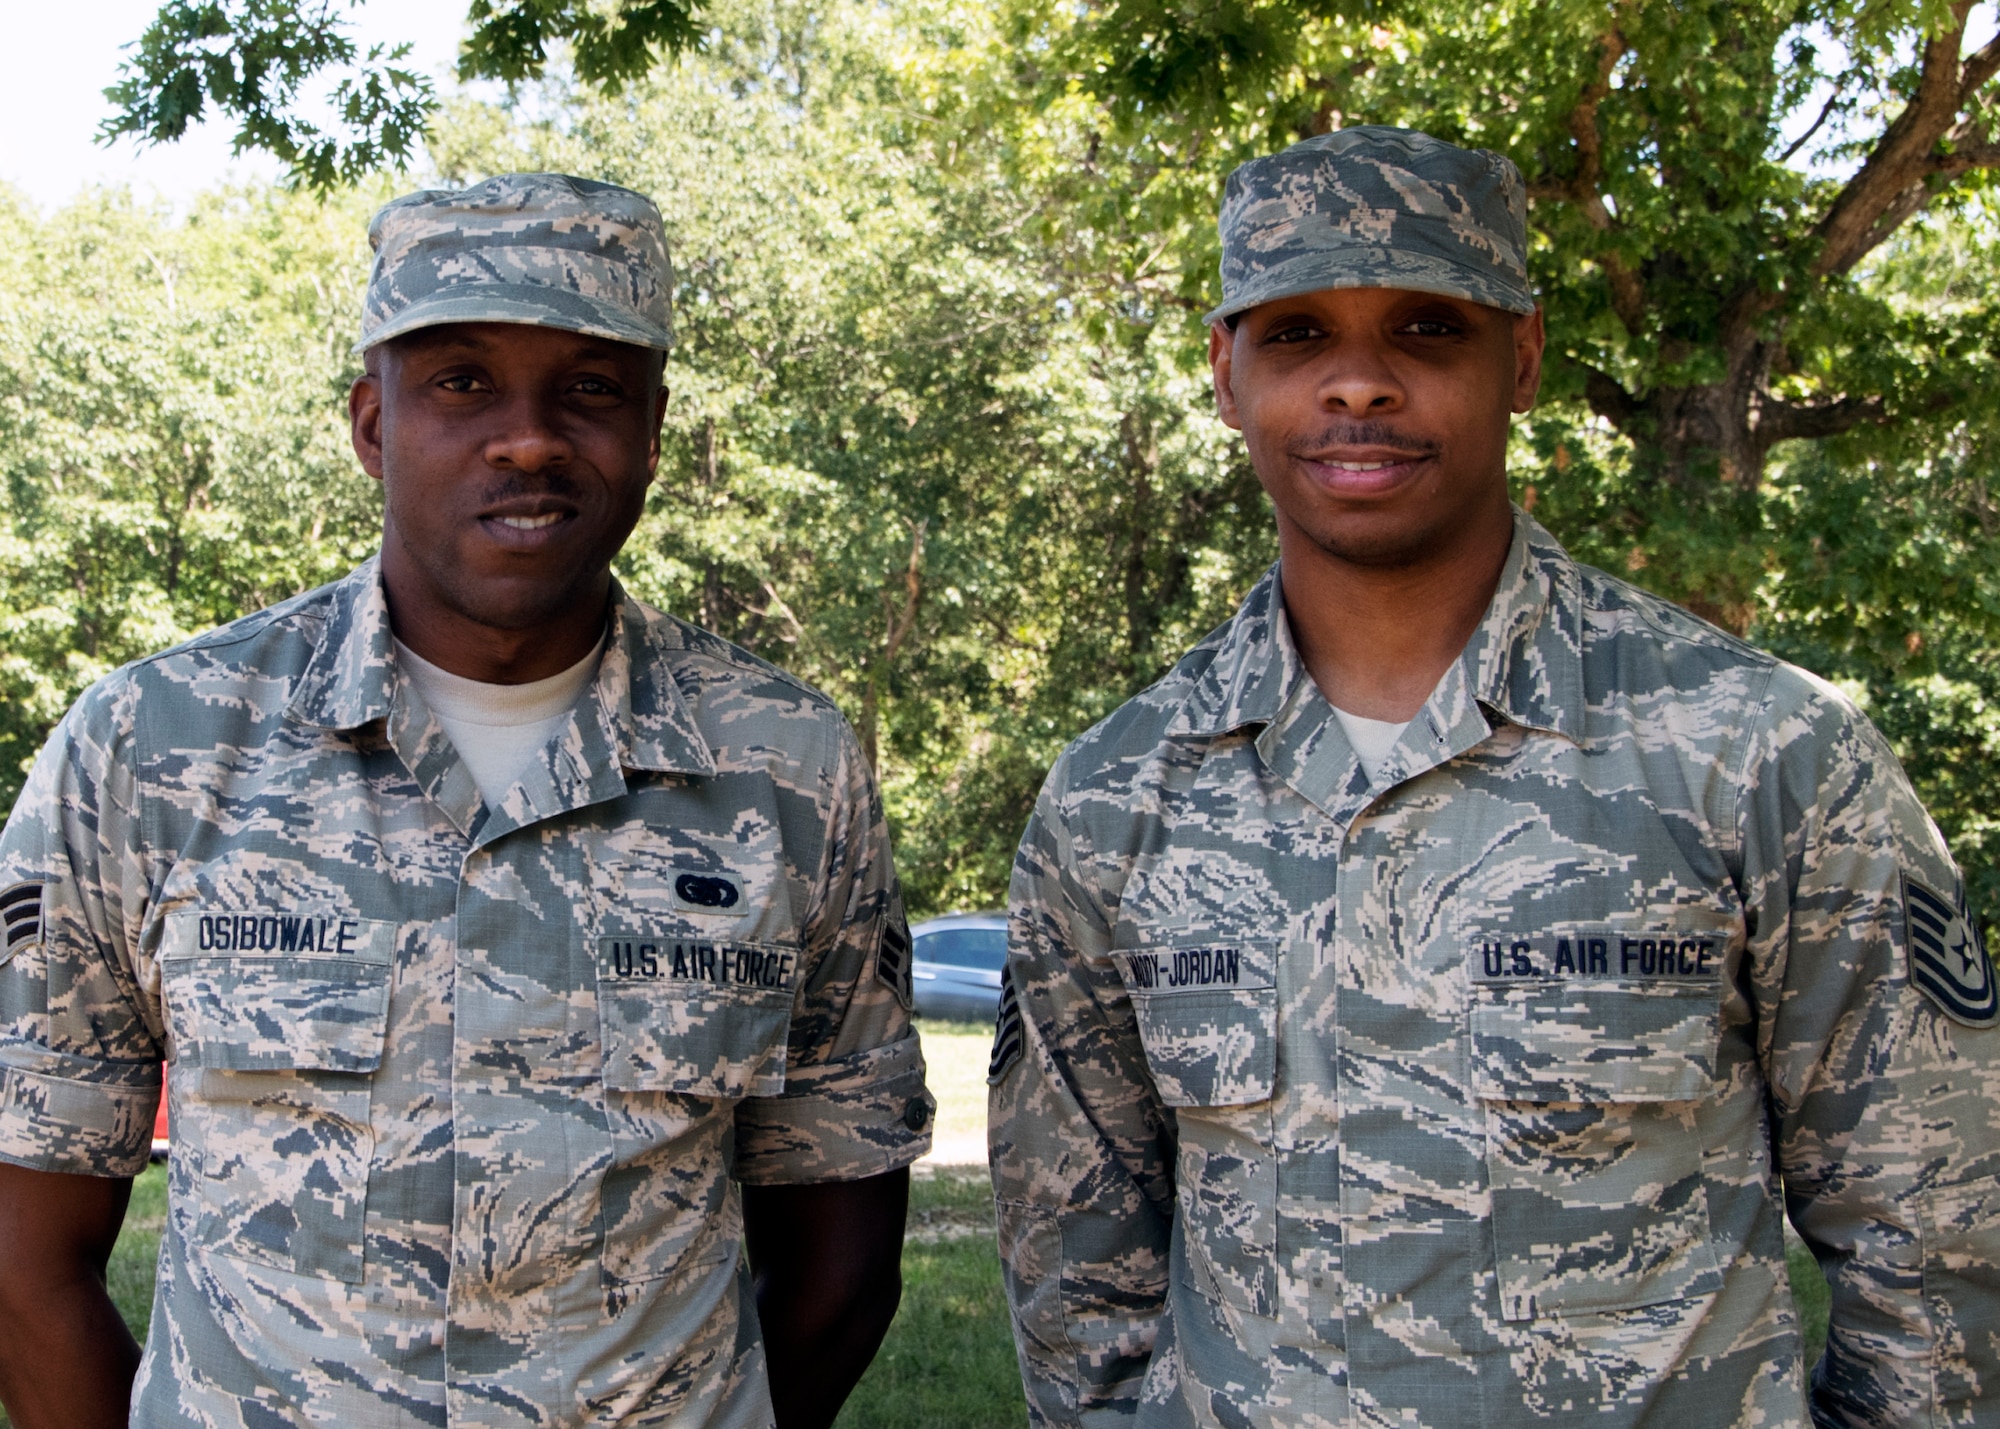 Senior Airman Adetokunbo Osibowale (left) and Tech Sgt. Kyle Waddy-Jordan, 459th Logistics Readiness Squadron, pose for a photo Sept 3, 2019 at Joint Base Andrews, Md. Waddy-Jordan recently saved Osibowale’s life during training to Okinawa Air Base, Japan.